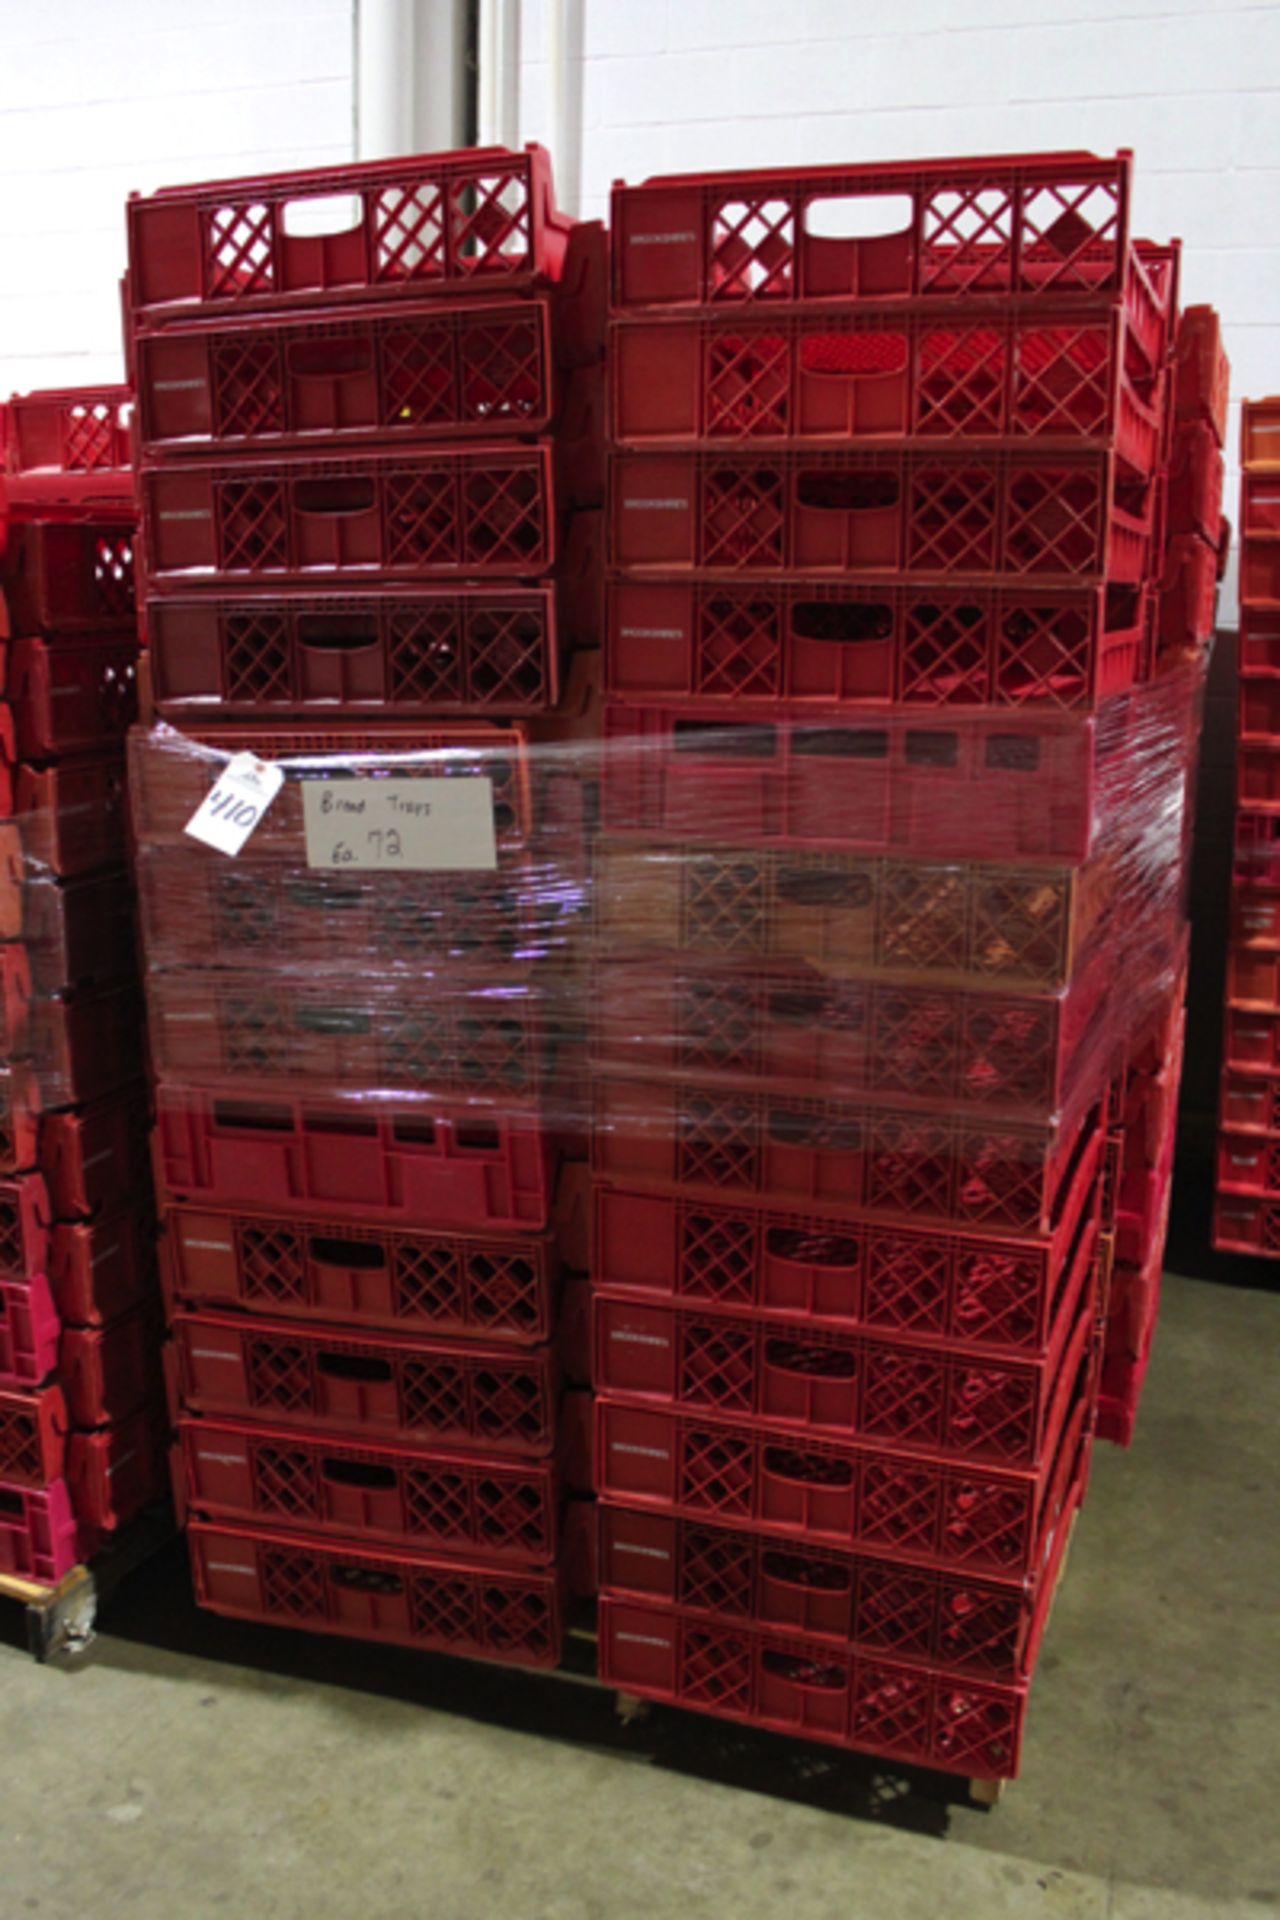 Lot of (72) Bread Trays, 20 1/2" x 24 3/4" x 5 1/4" | Loading Price: $25 Or Buyer May Hand Carry